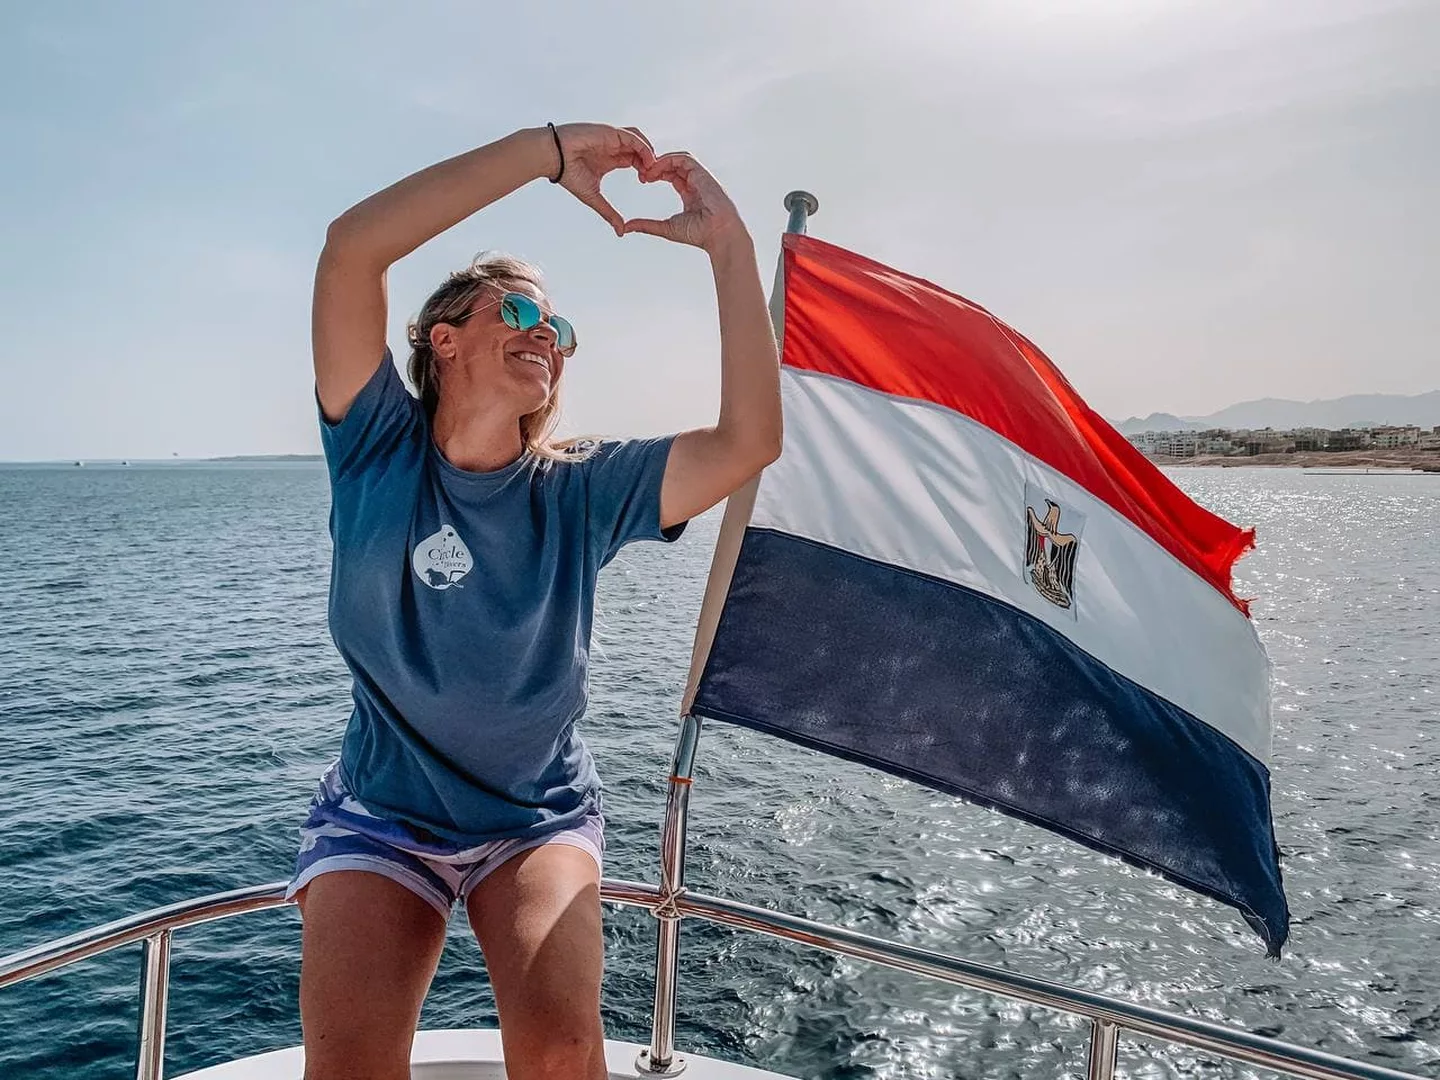 A woman makes a heart symbol with her hands while sitting on the edge of a boat next to an Egyptian flag